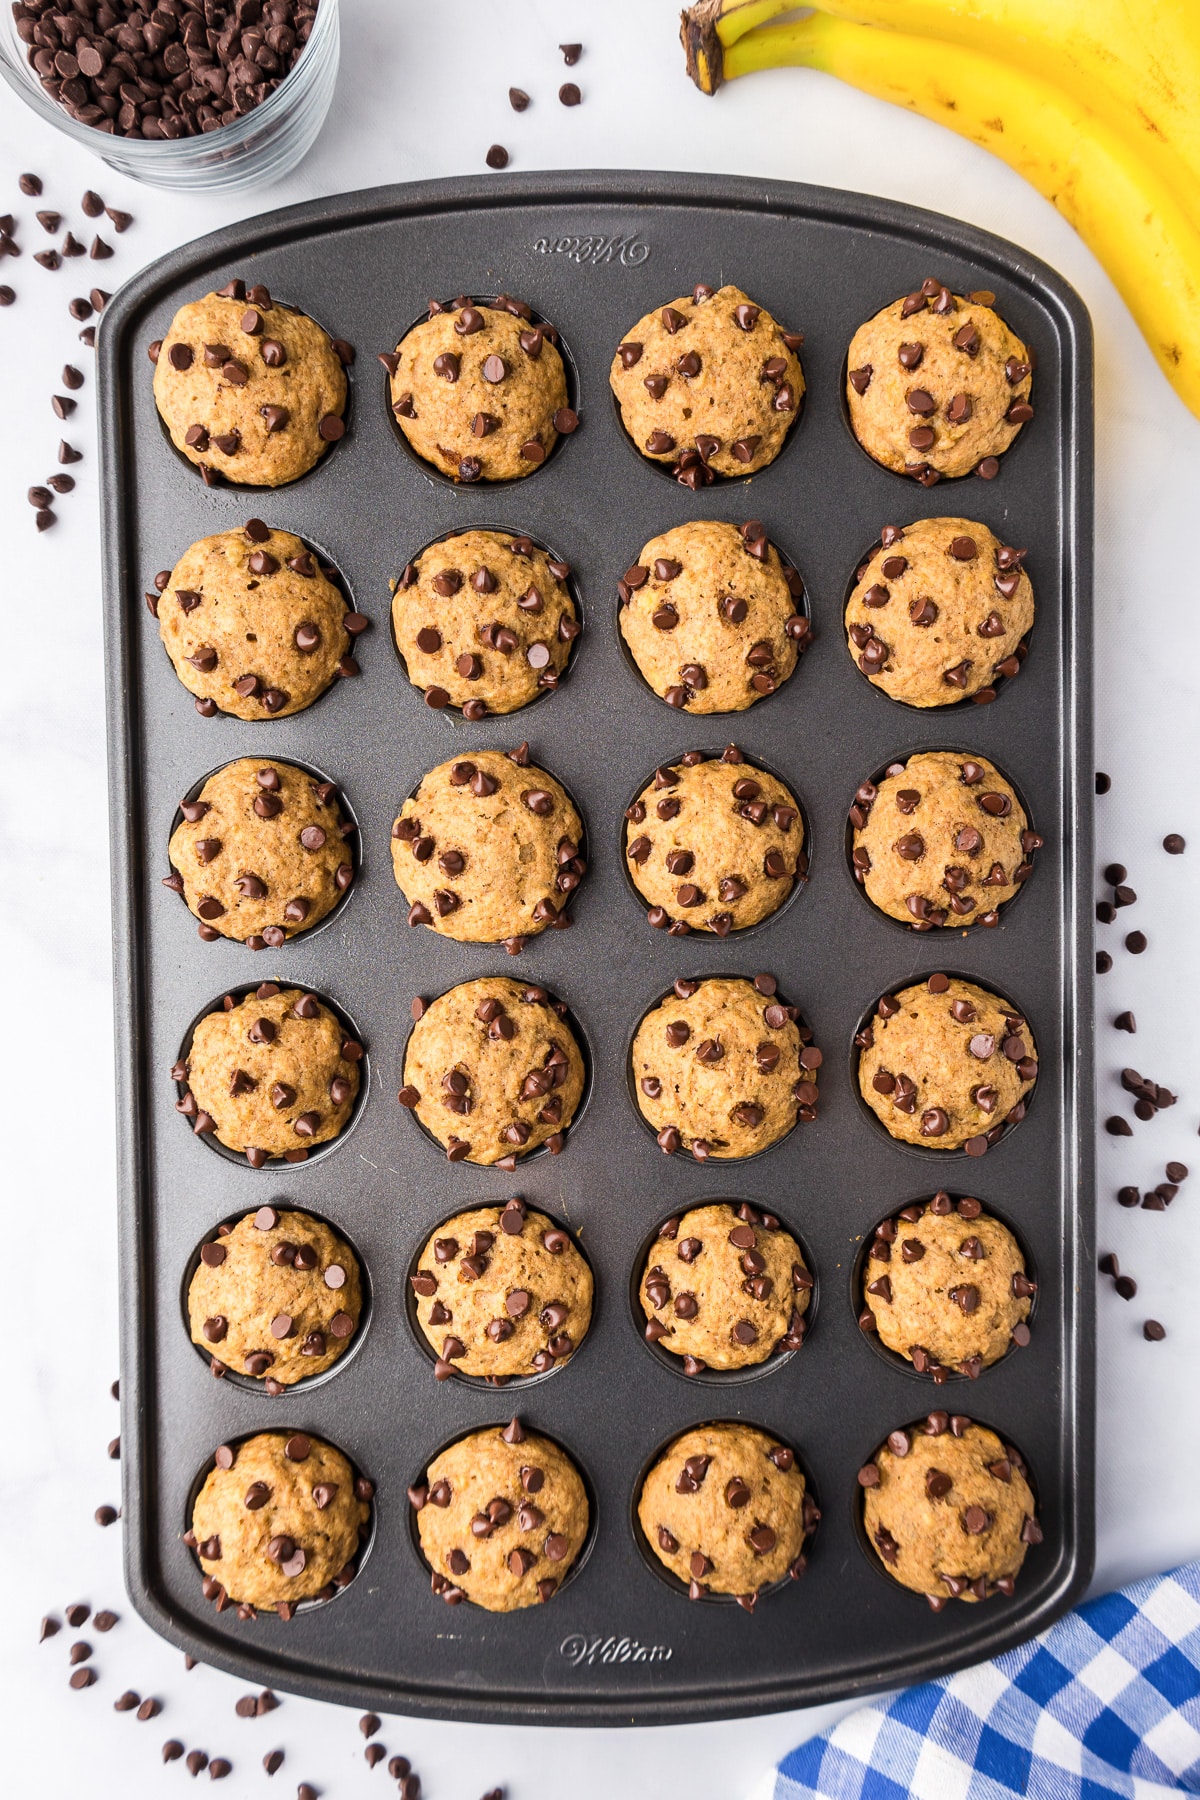 A tray of freshly baked Banana chocolate chip mini muffins with loose chocolate chips and bananas on the side of the pan.